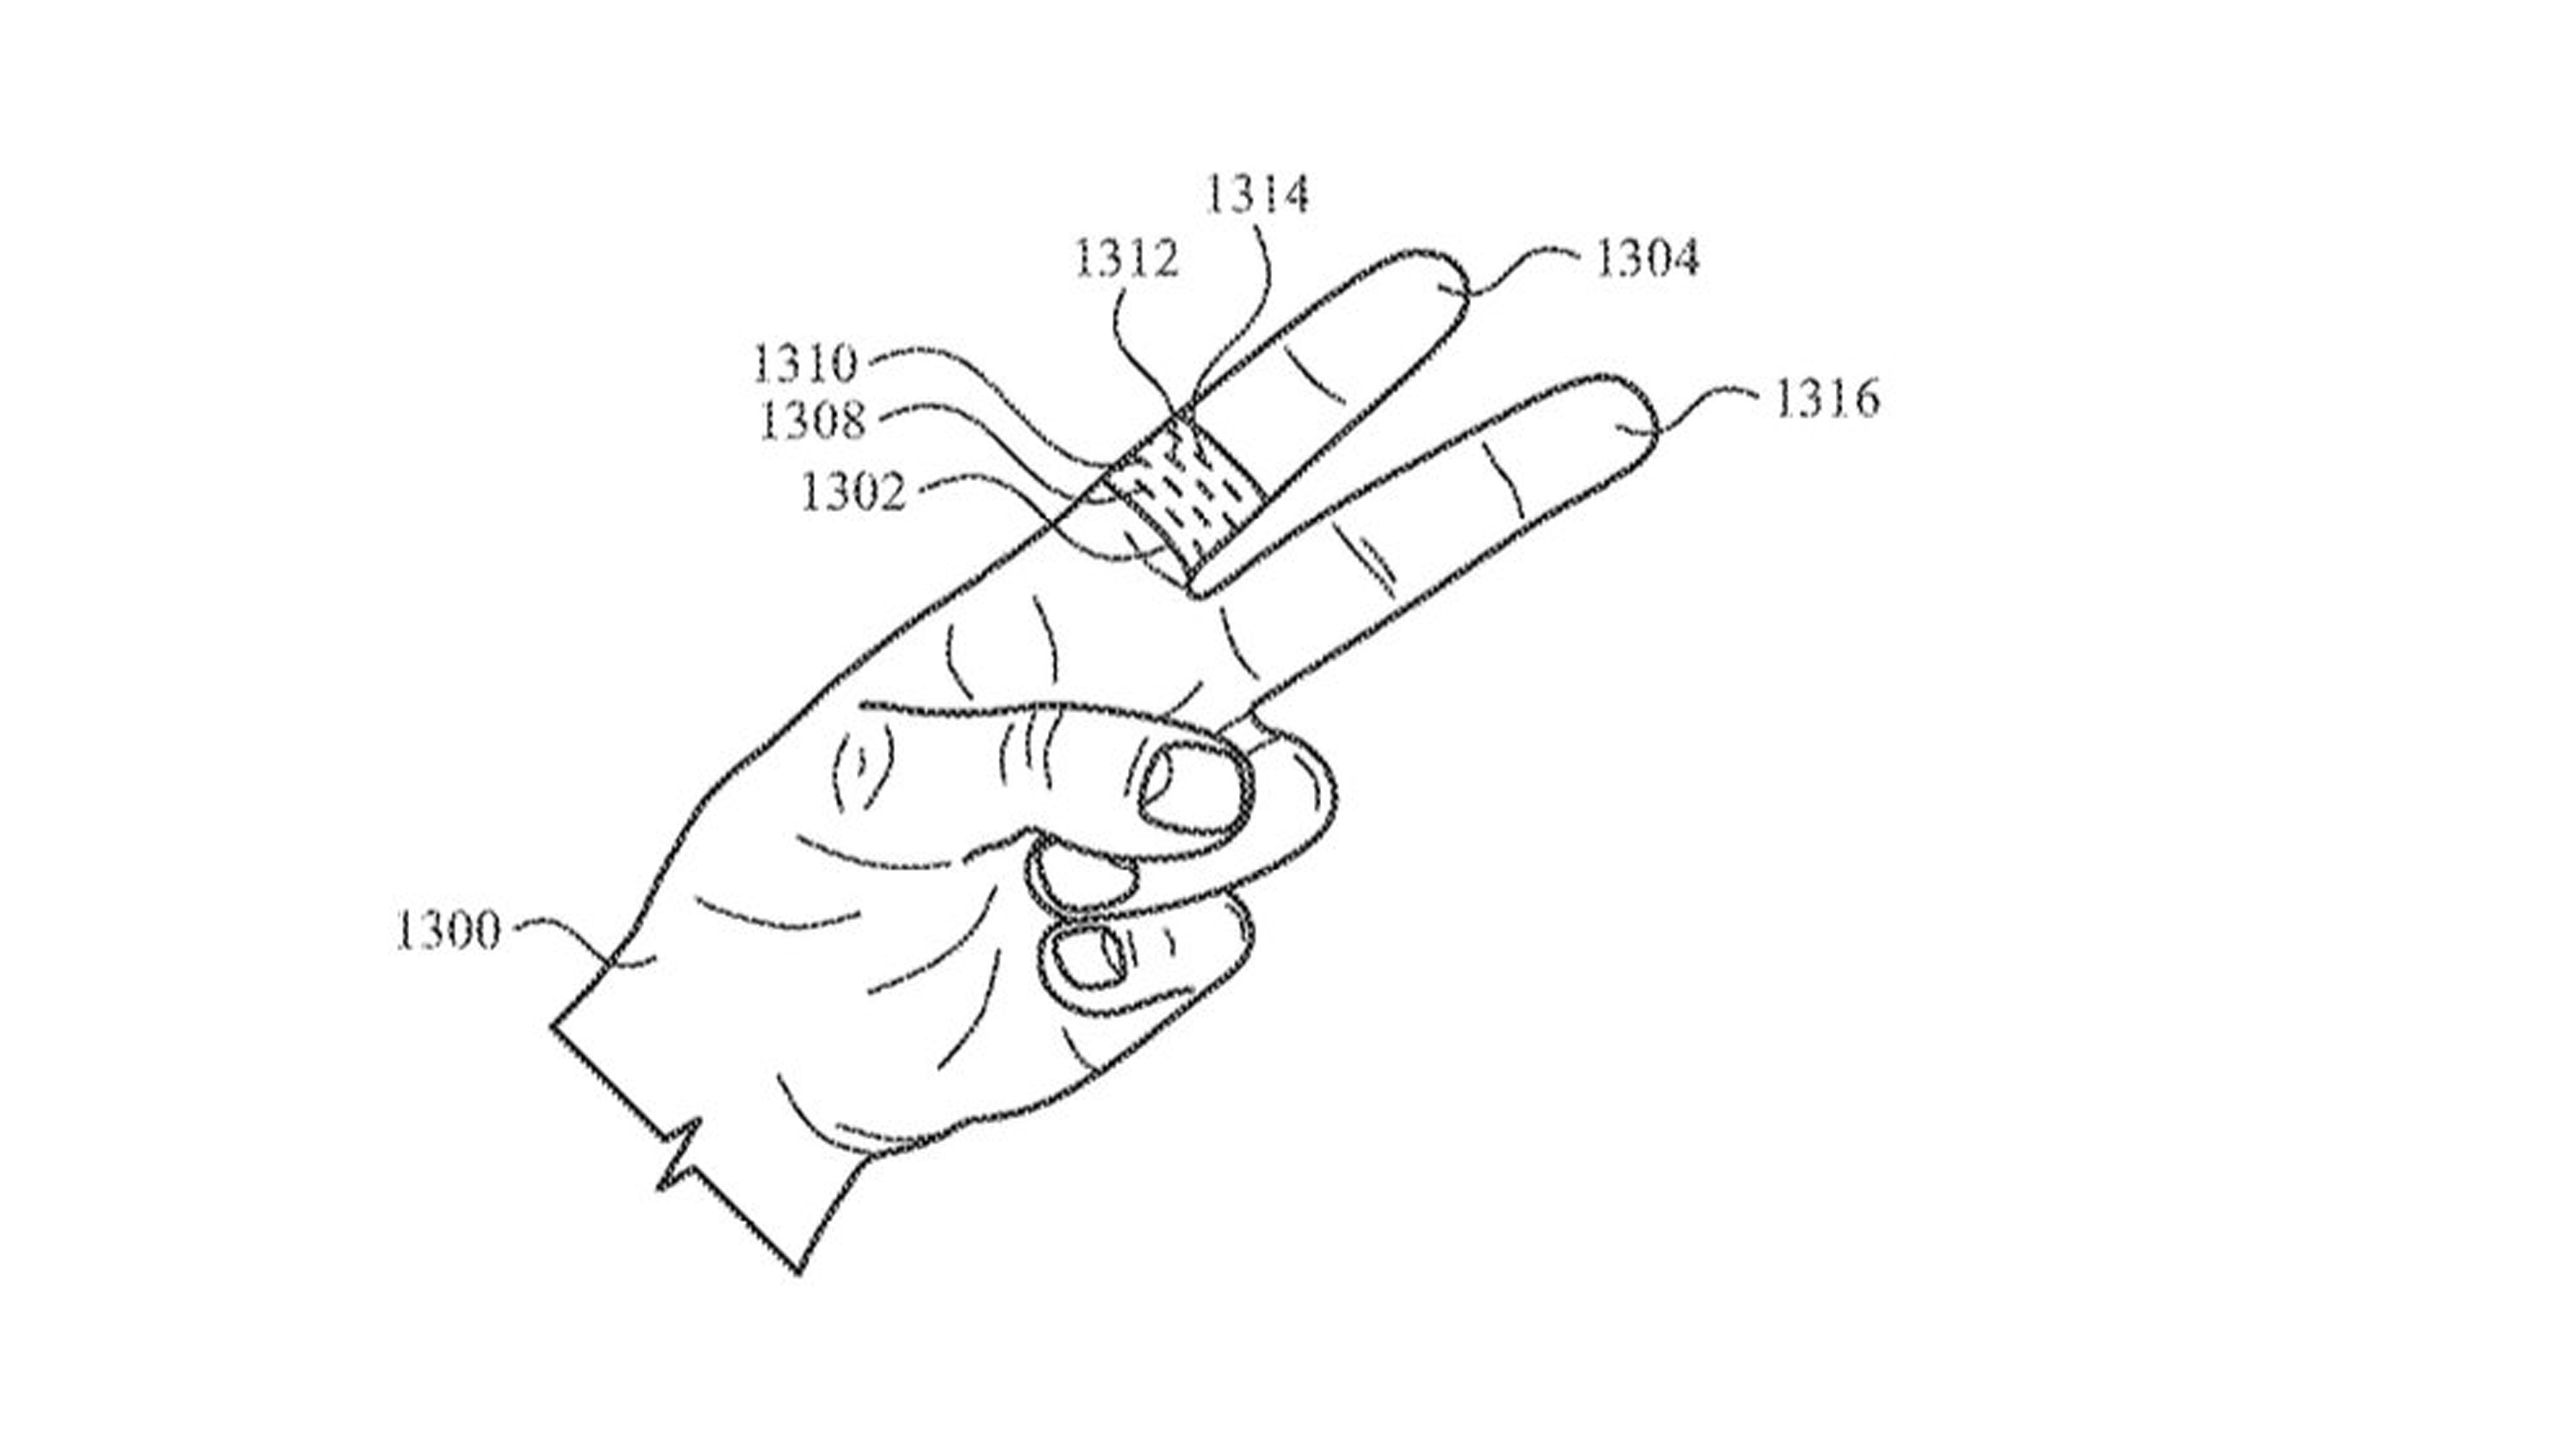 A scissors gesture in an Apple ring patent.